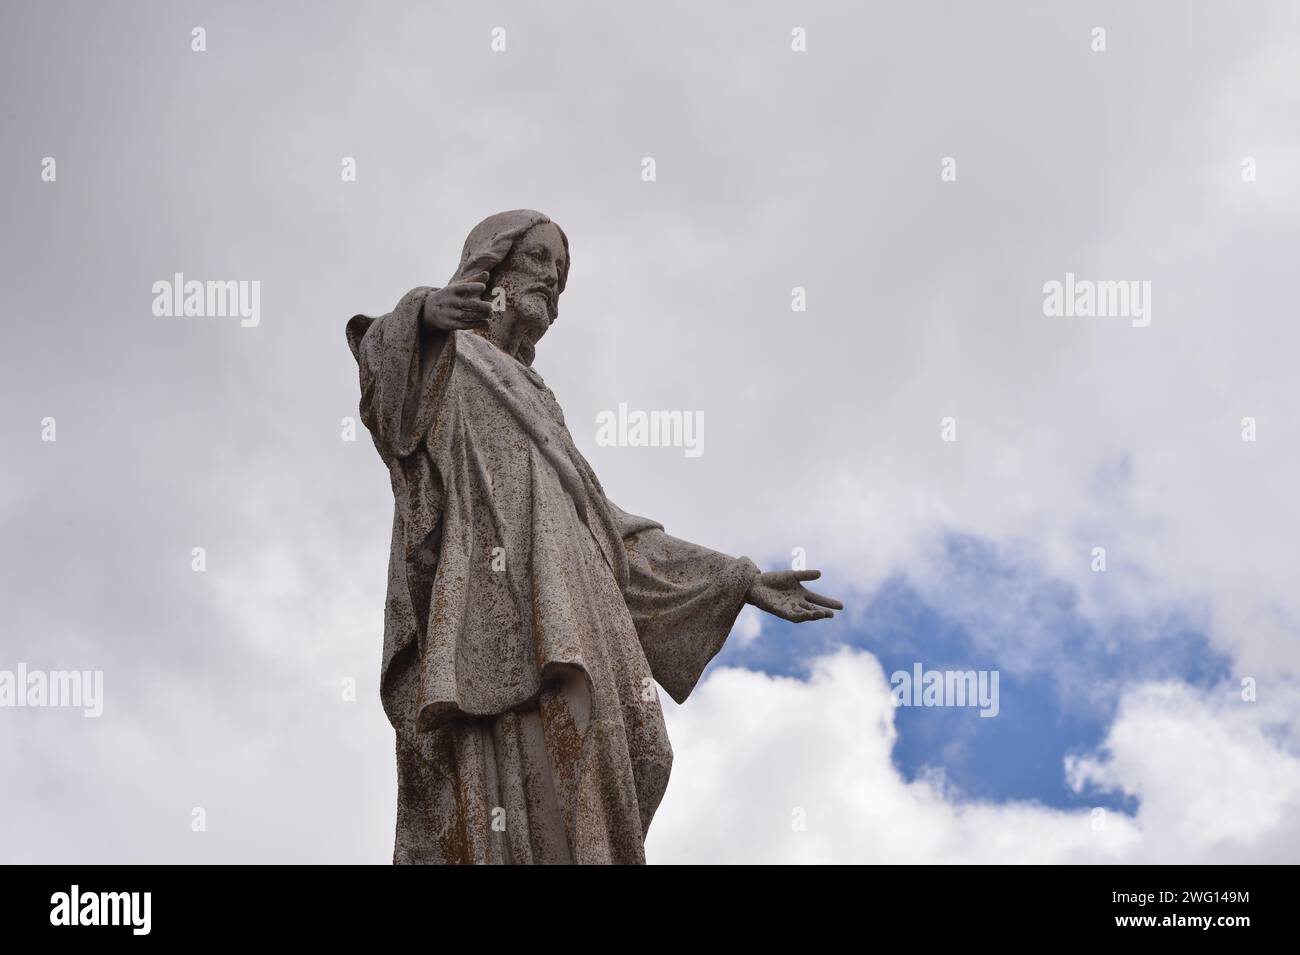 A low angle shot of a statue of Jesus Christ in the small town of Ayllon, Spain Stock Photo